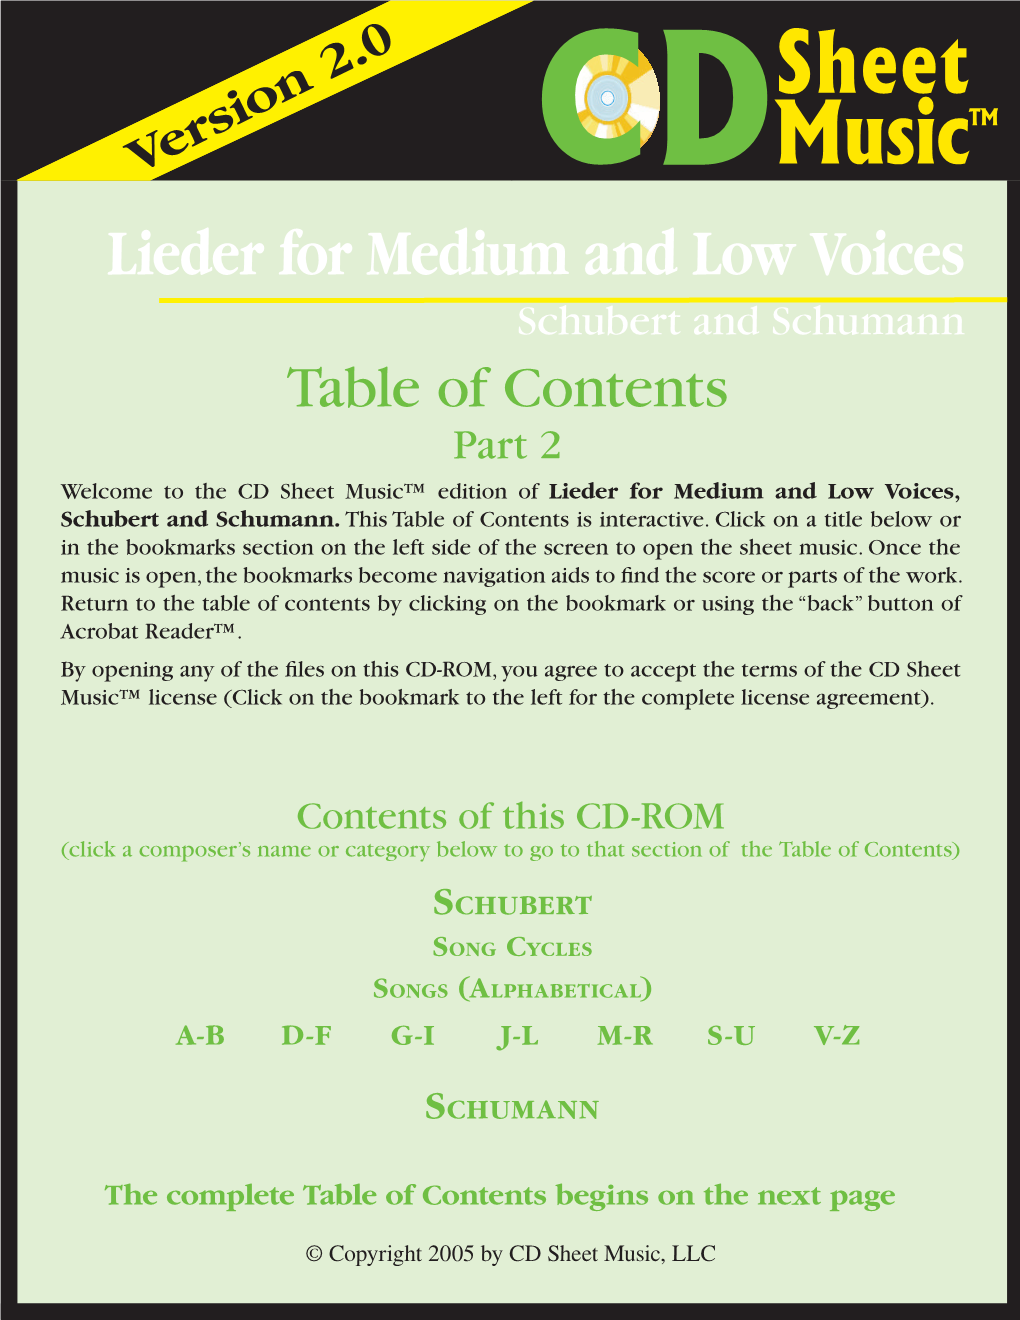 Table of Contents Part 2 Welcome to the CD Sheet Music™ Edition of Lieder for Medium and Low Voices, Schubert and Schumann